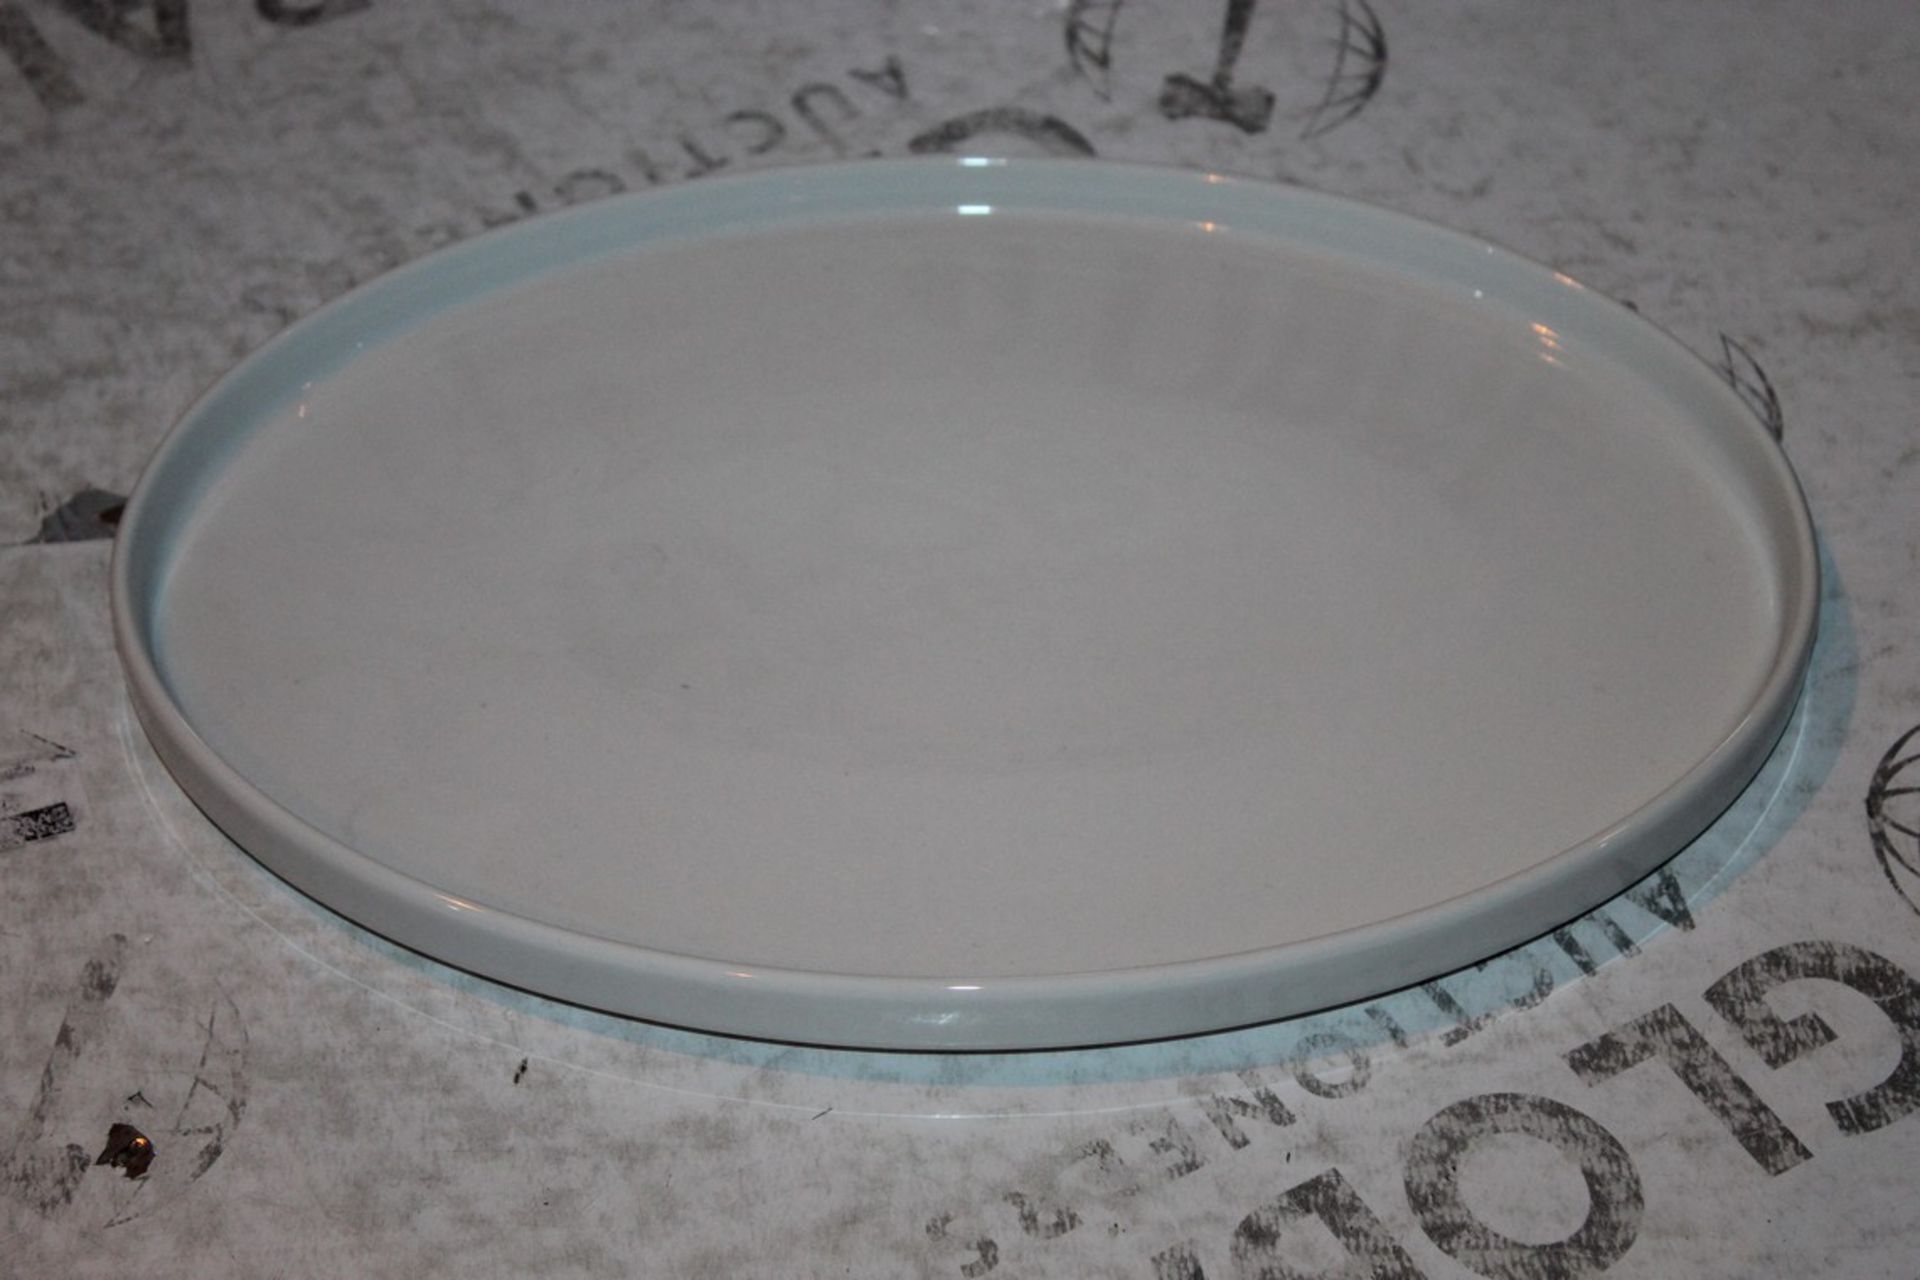 Lot To Contain 5 Seltmann Weiden Dinner Plates Combined RRP £150 (17003) (10.01.20) (Public